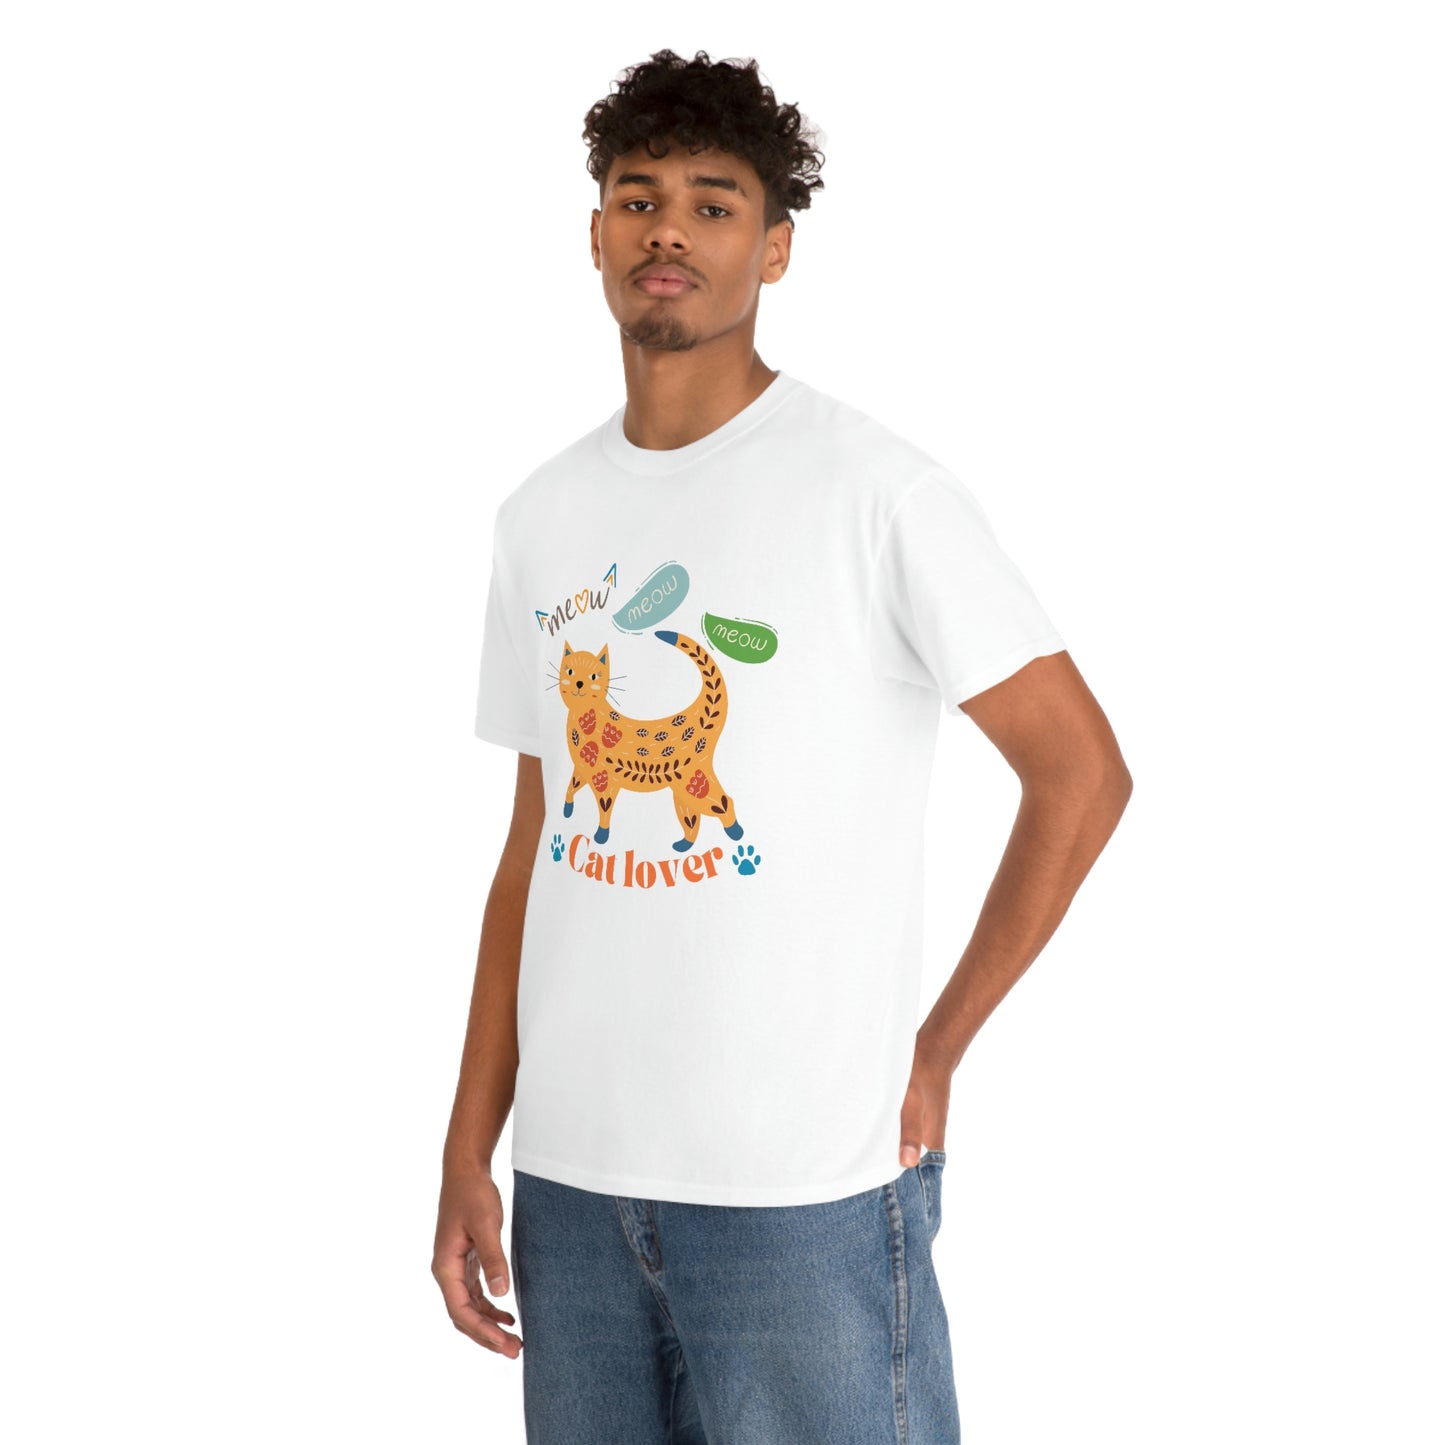 Meow Colorful Cat " Cat Lover "design Graphic tee shirt